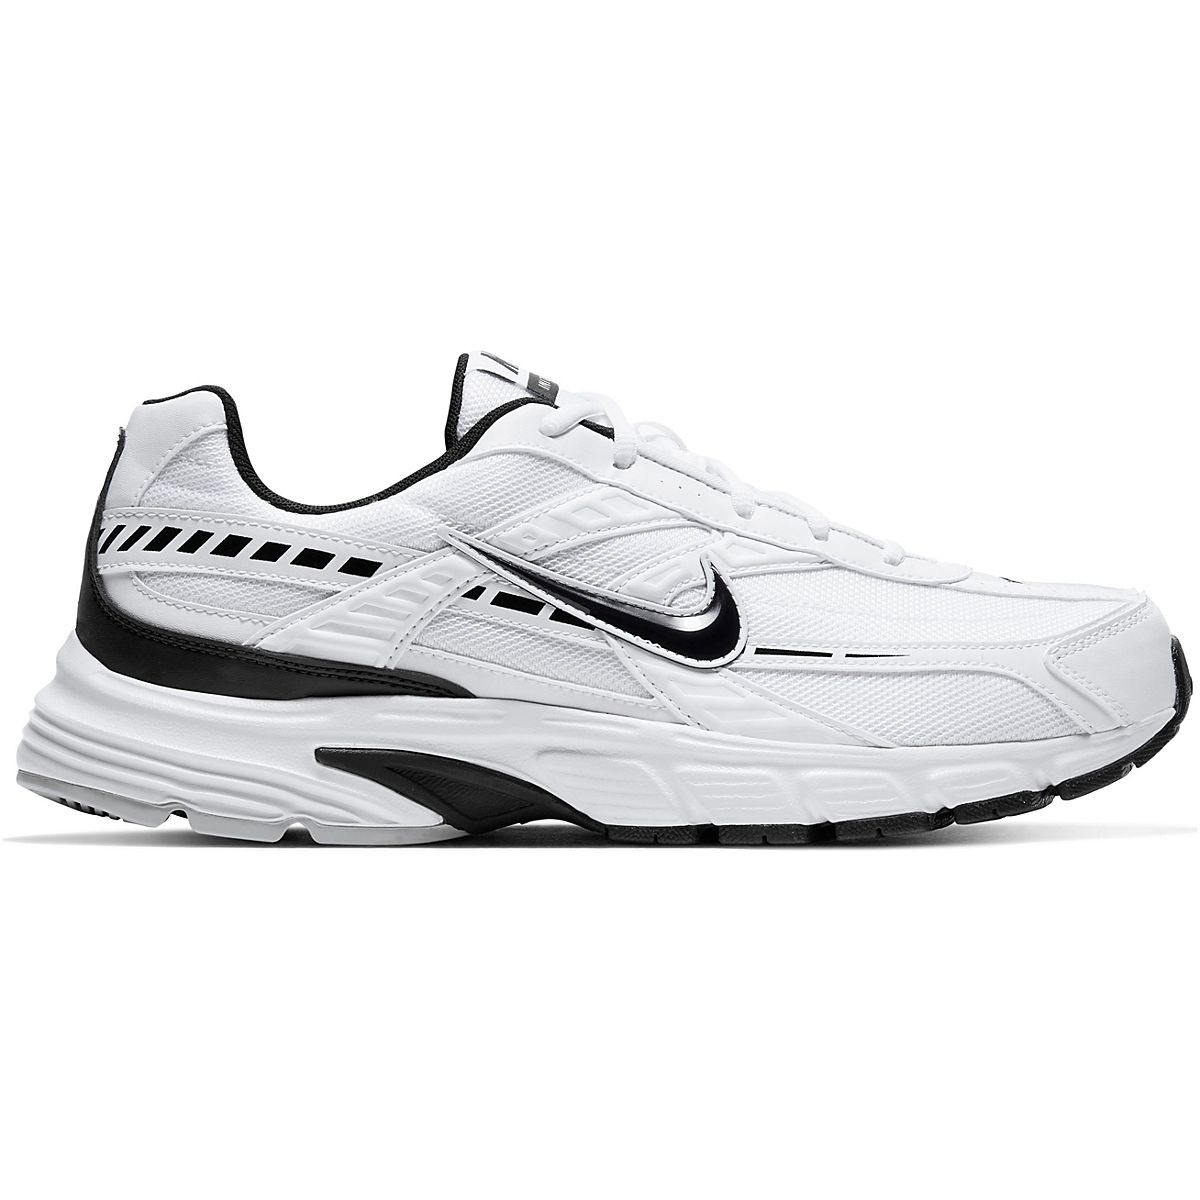 Nike Men's Initiator Running Shoes | Free Shipping at Academy